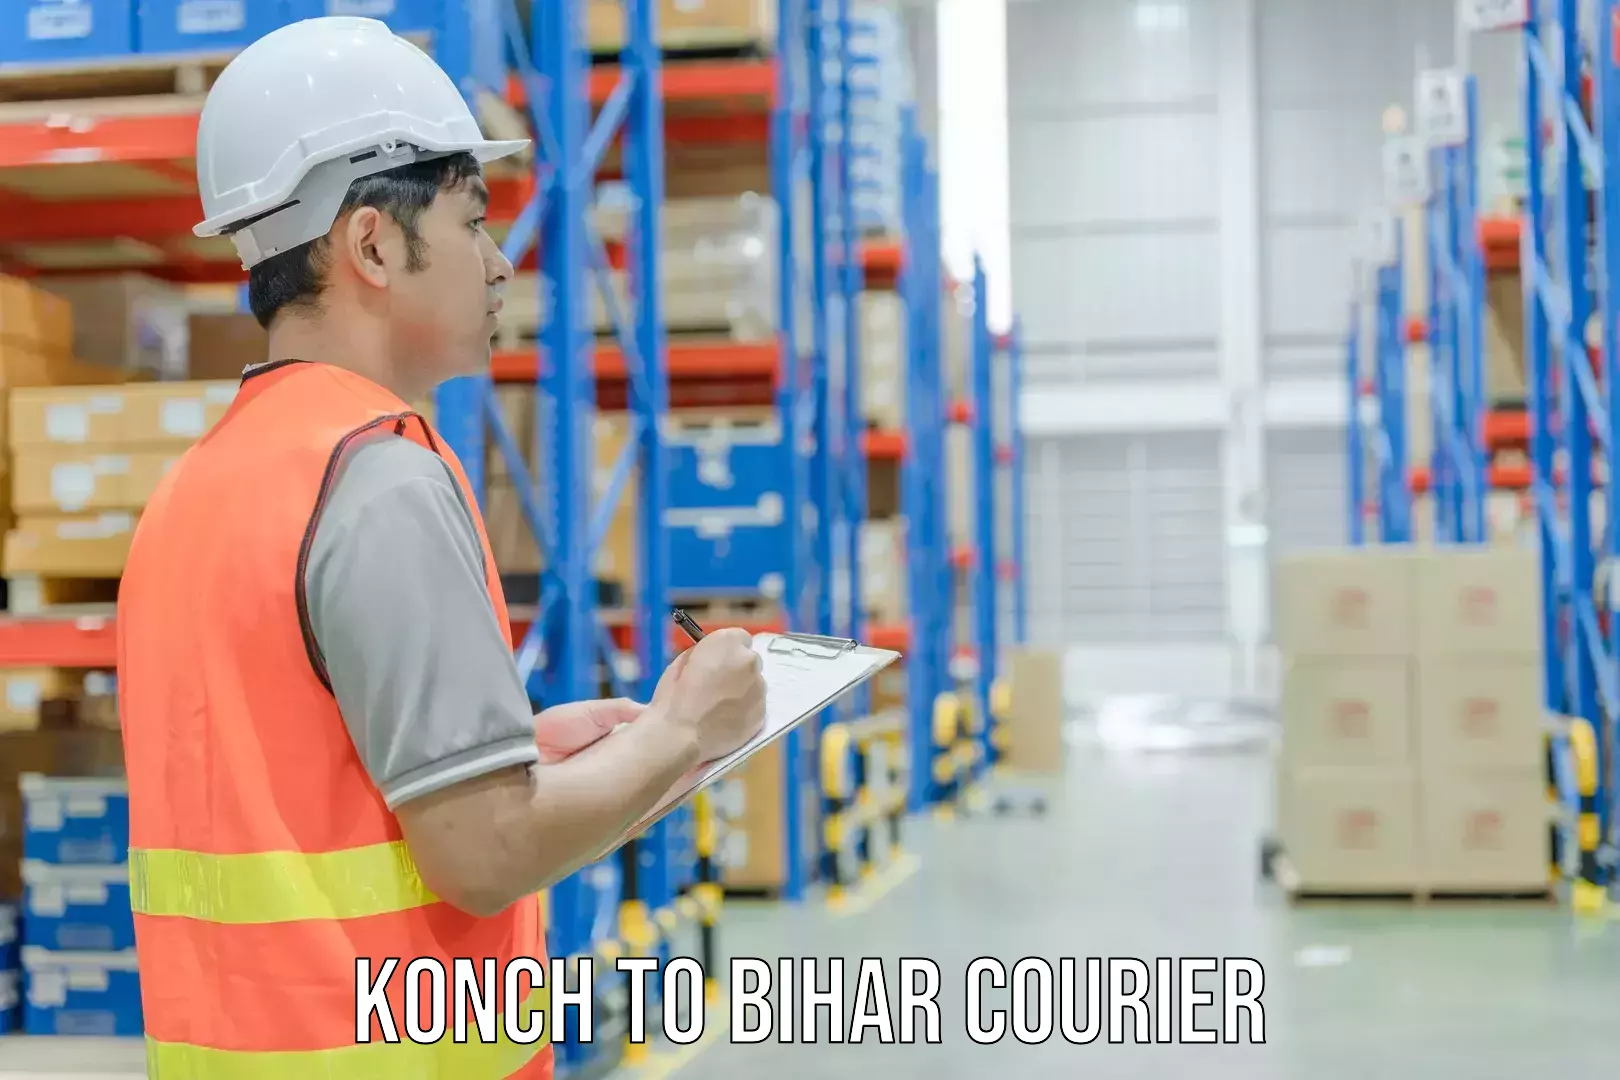 Business shipping needs Konch to Aurai